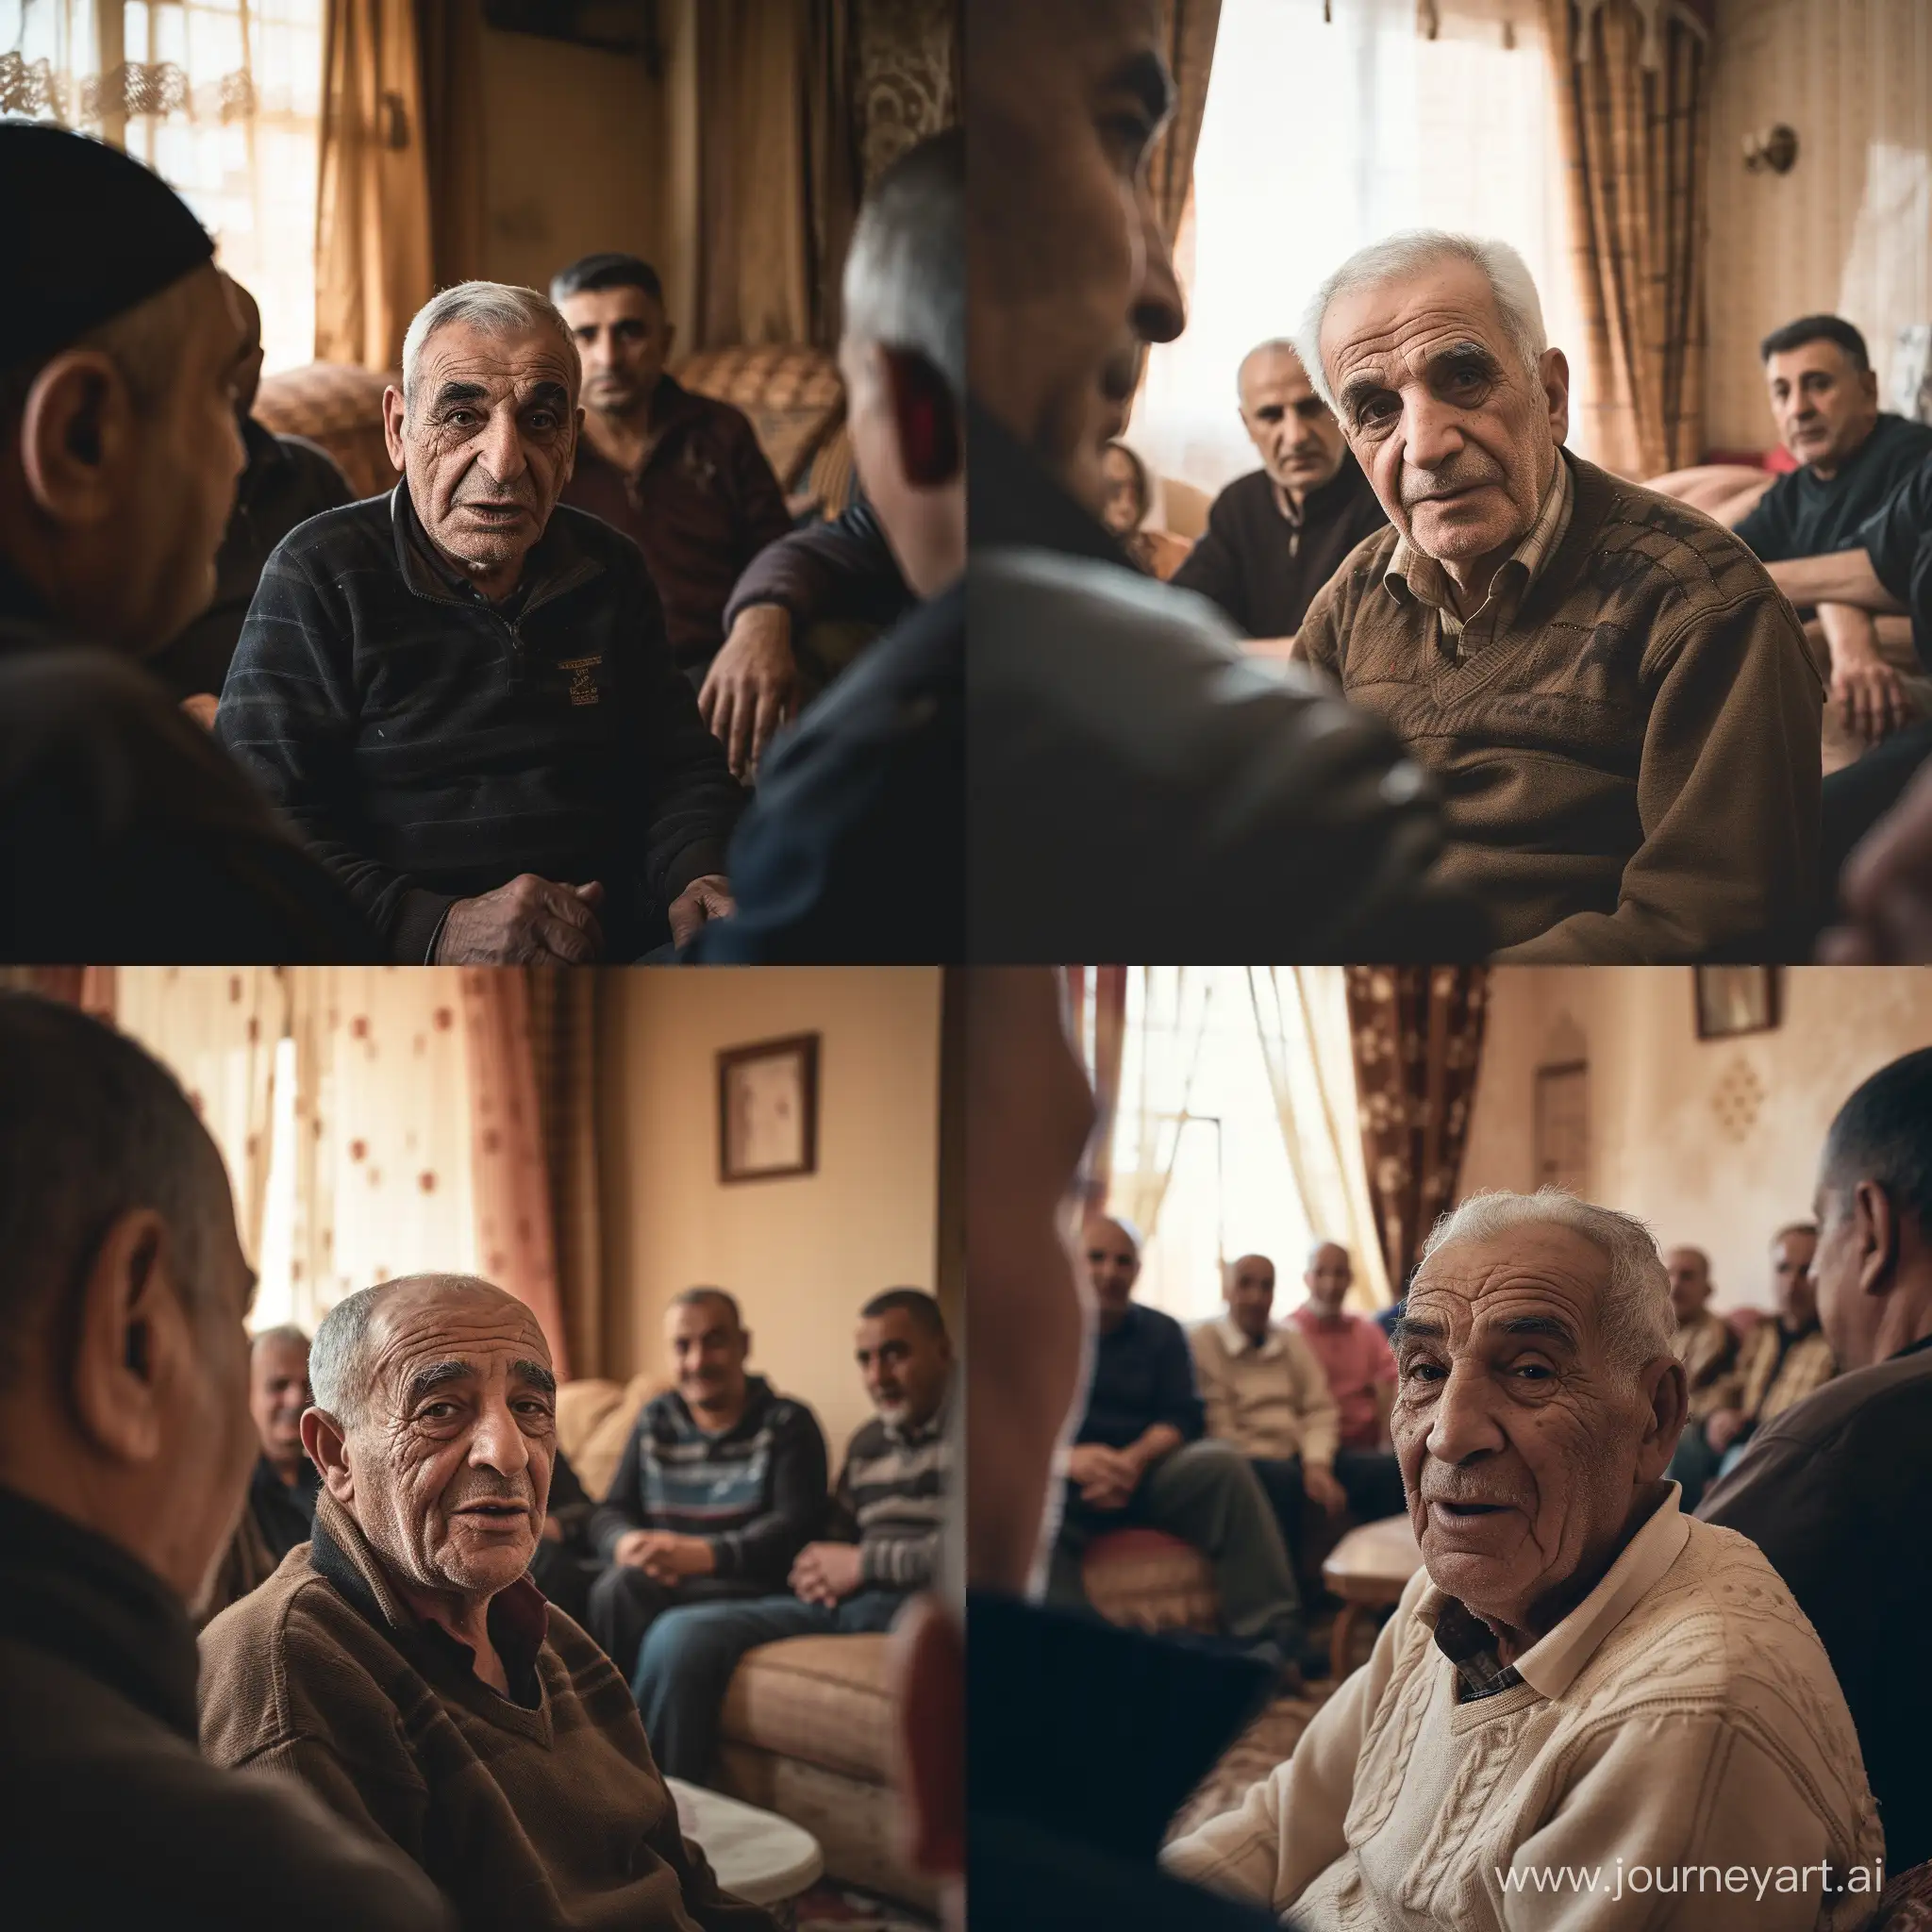 Captivating-Circle-of-Conversations-Elderly-Man-Engages-in-Lively-Discourse